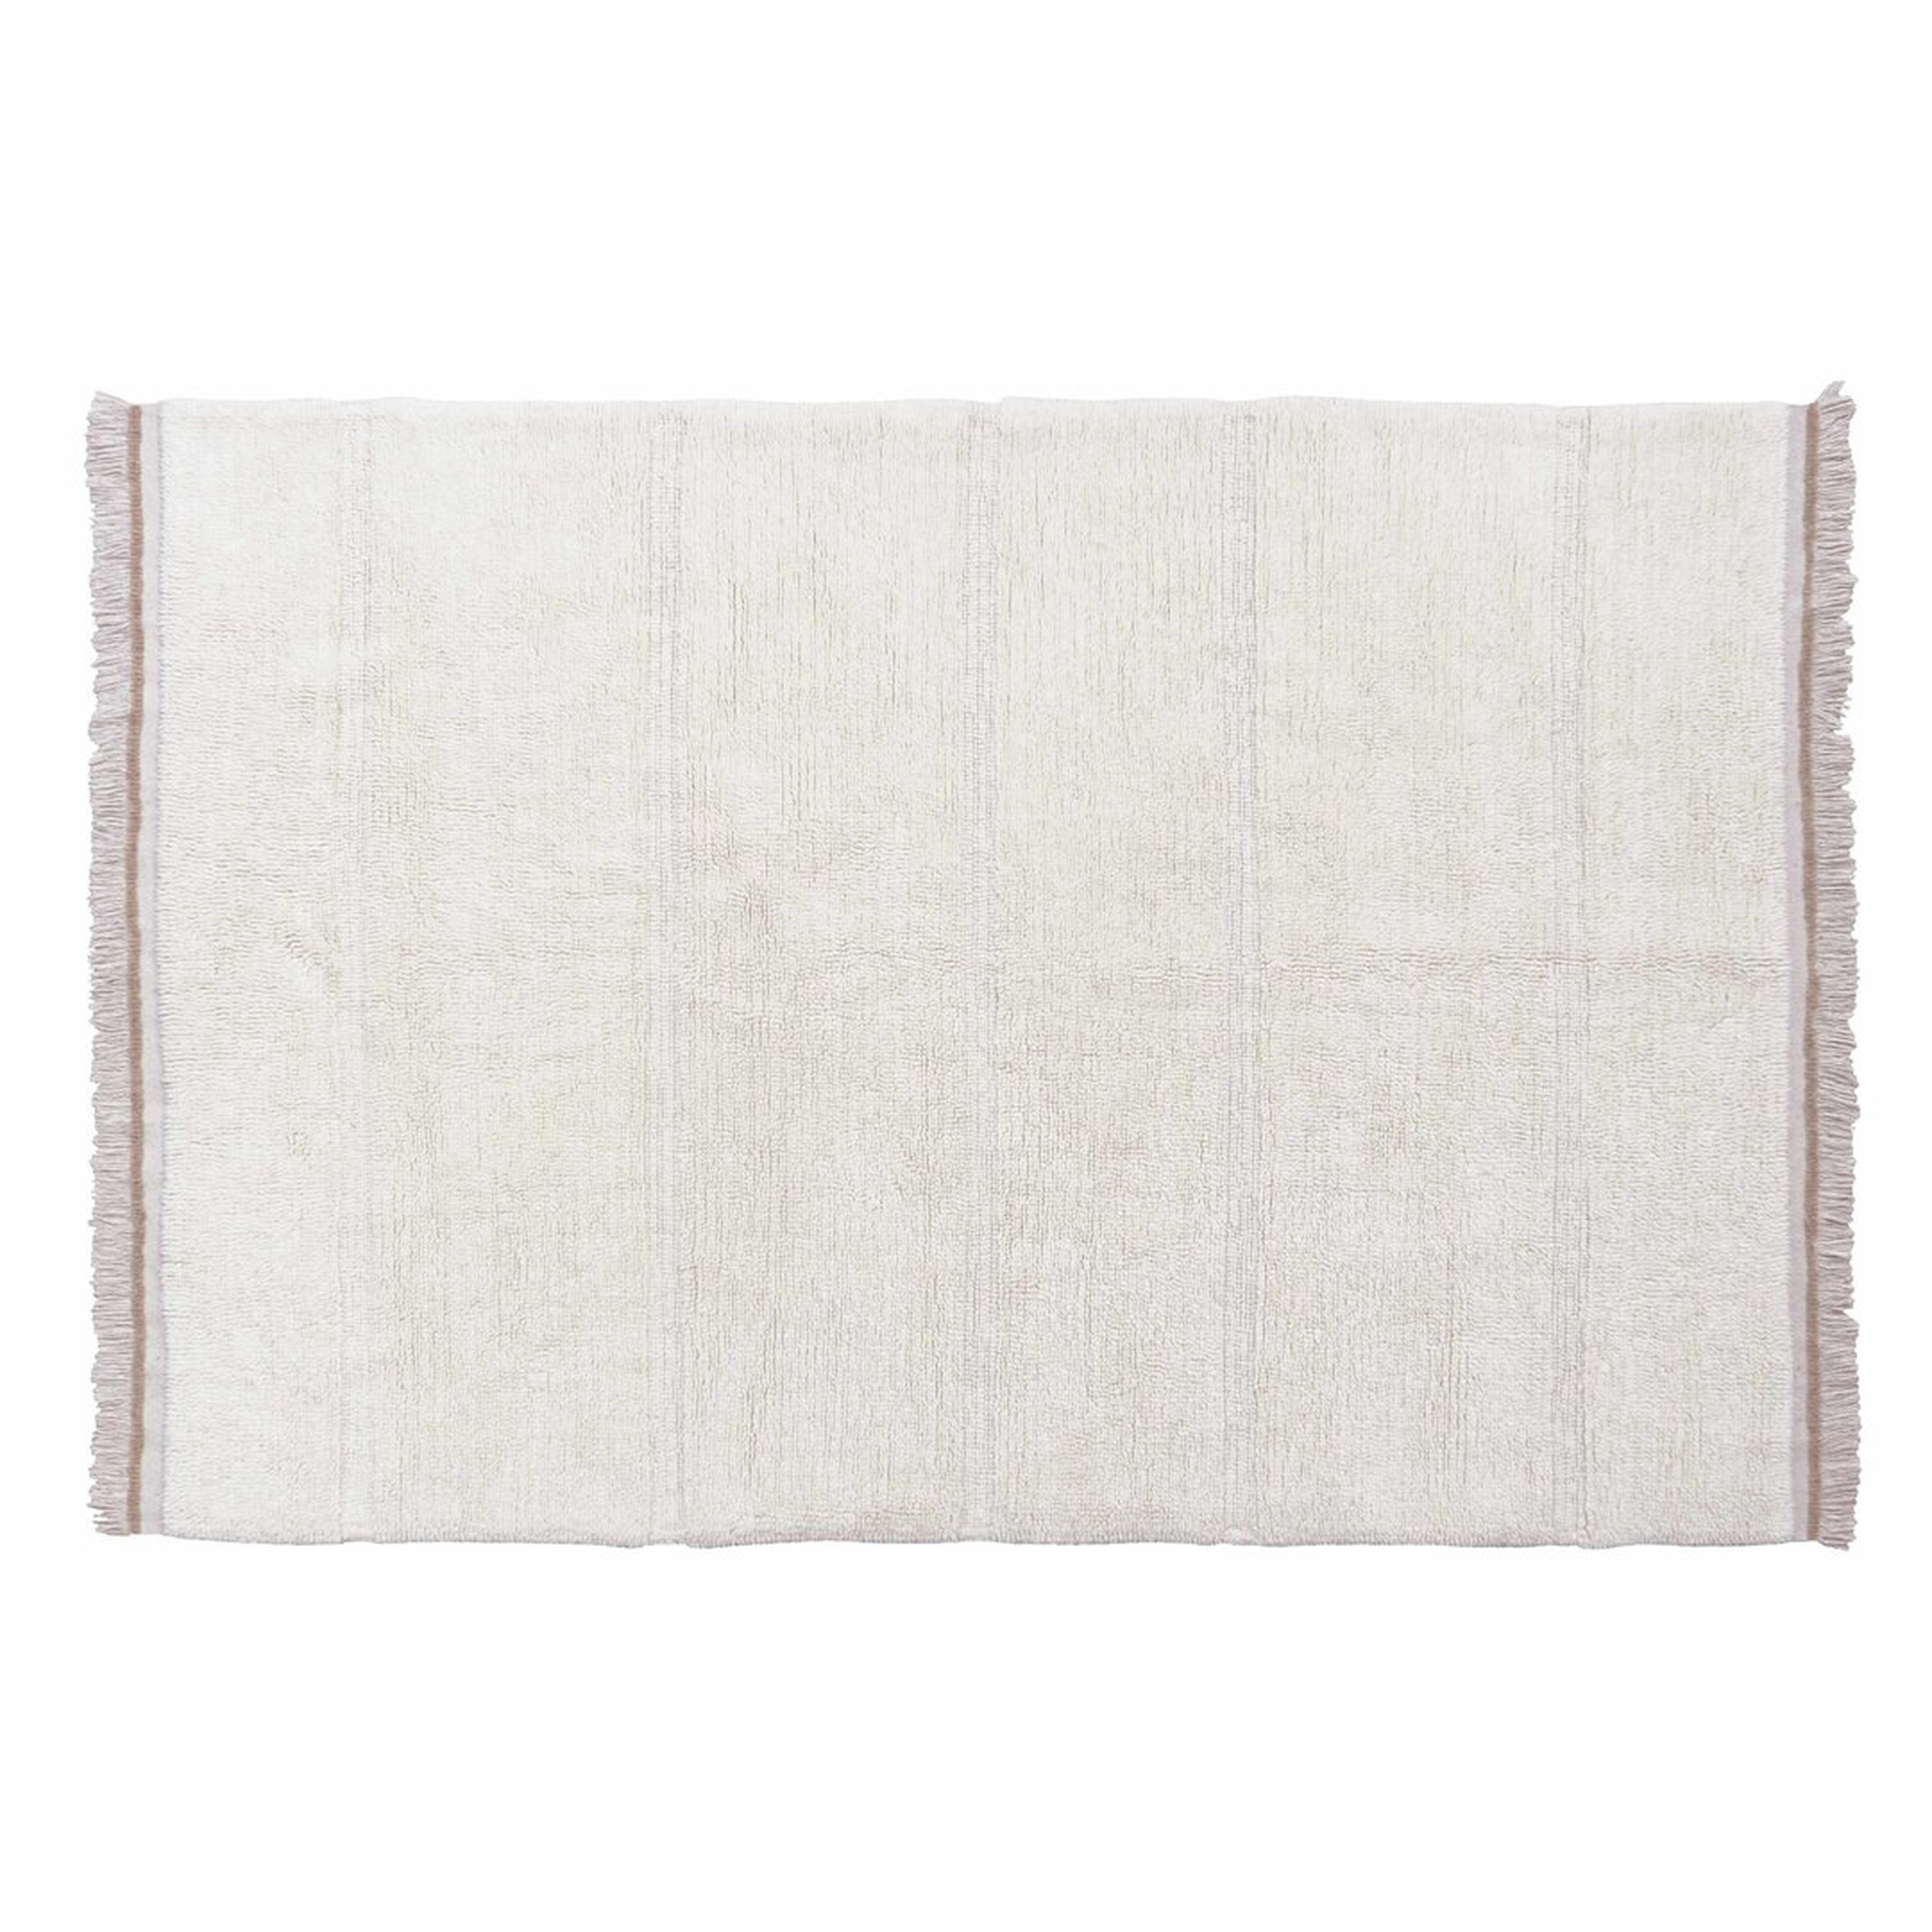 "Lorena Canals Sheep of the World Woolable Rug Steppe - Sheep White" - Perigold